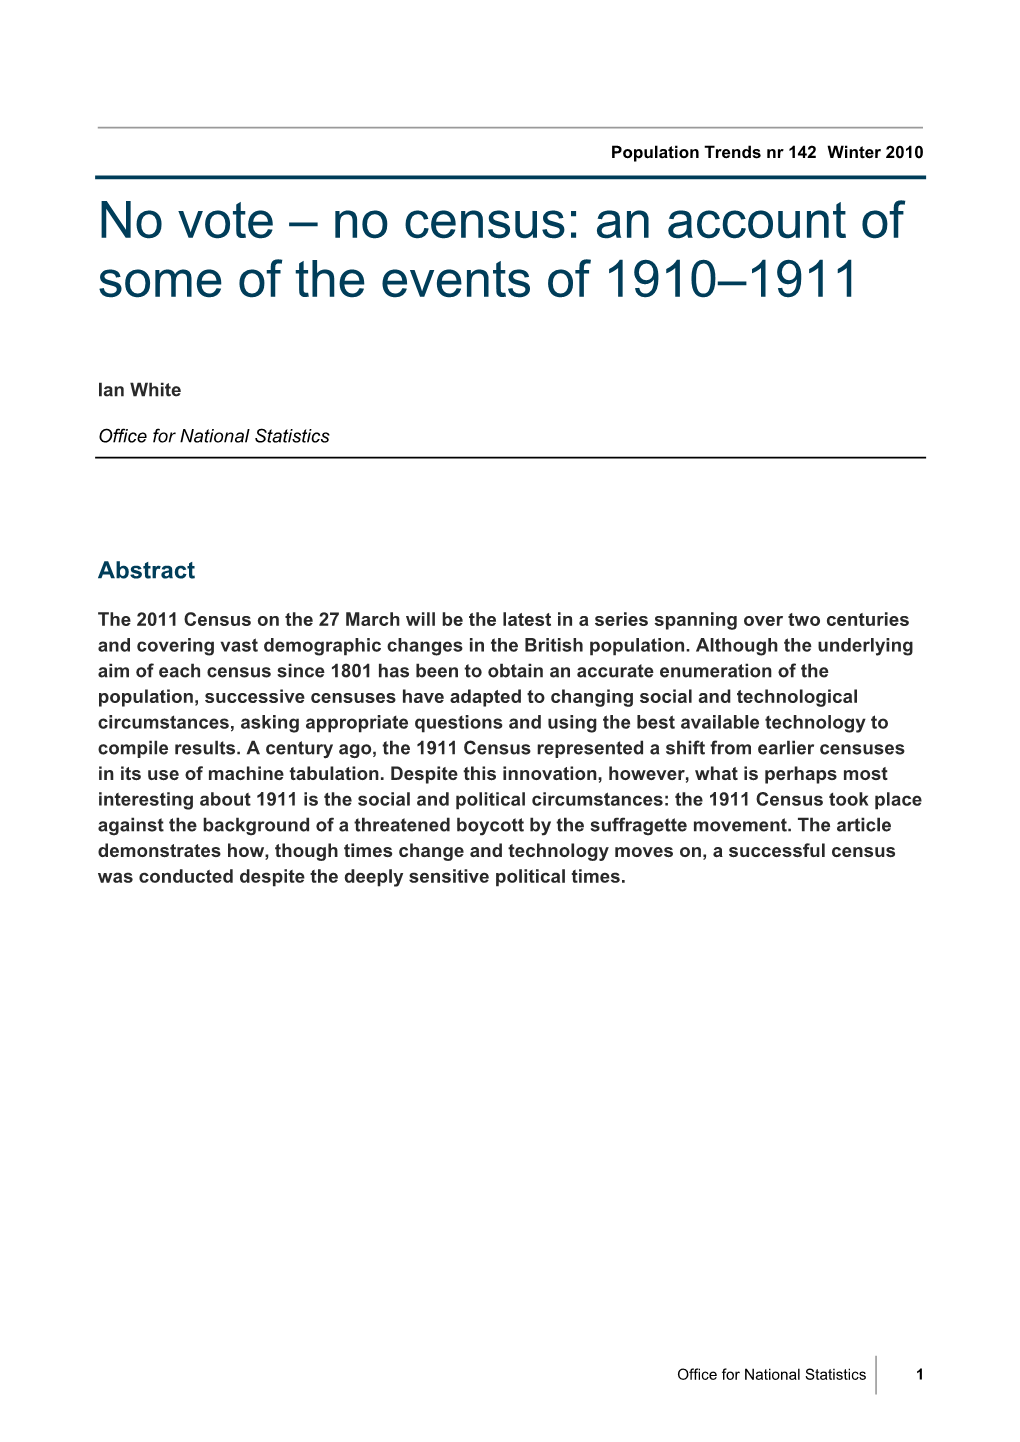 No Census: an Account of Some of the Events of 1910–1911